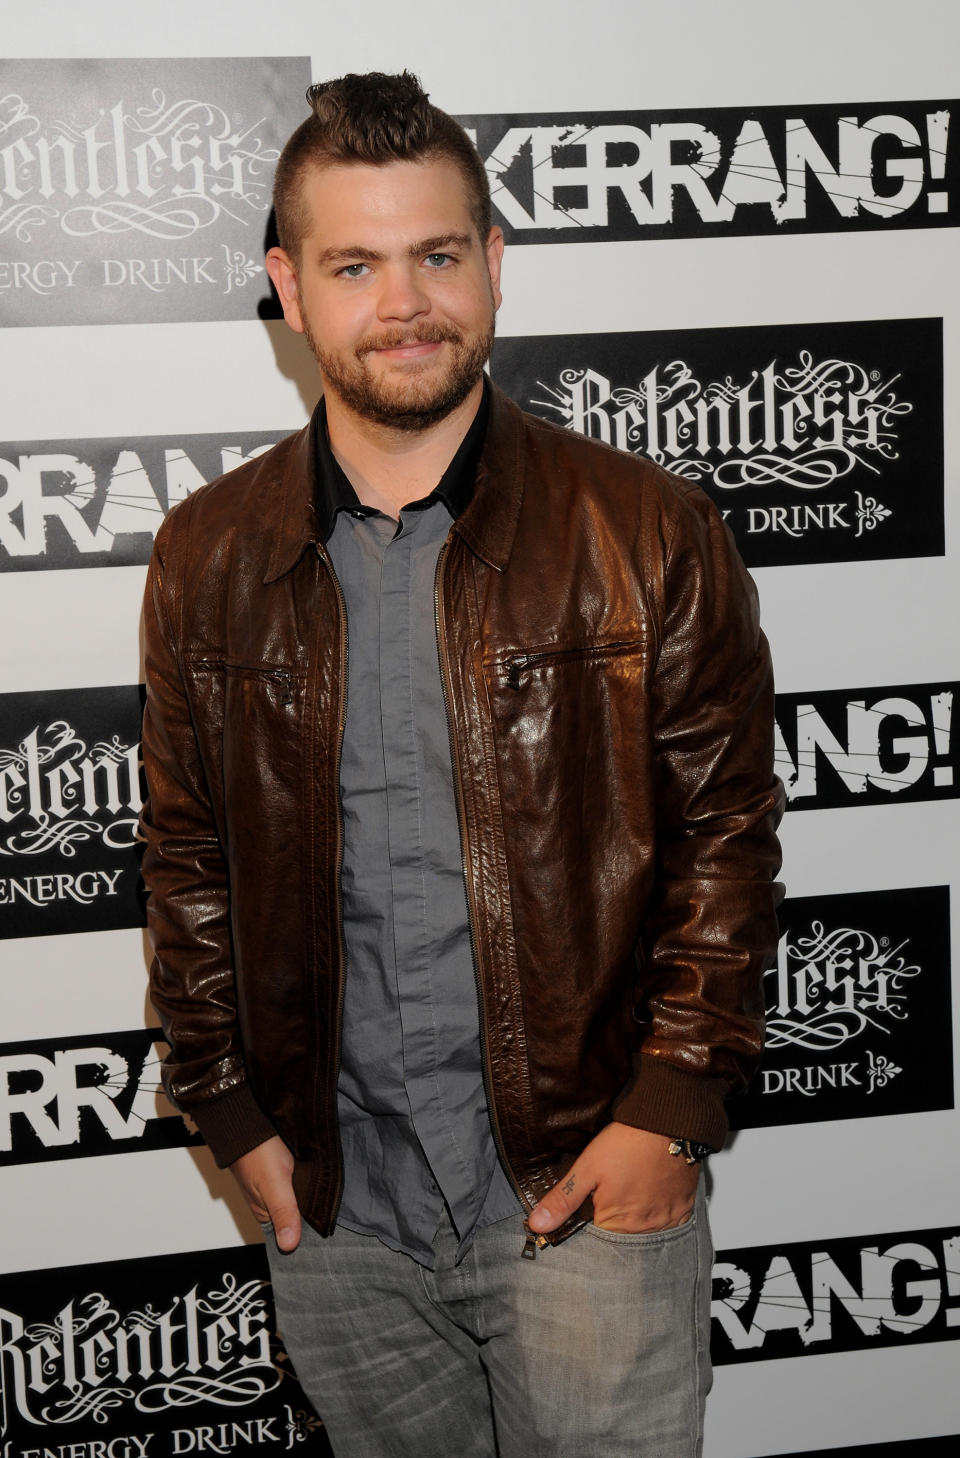 LONDON, ENGLAND - JUNE 09: Jack Osborne arrives for The Reckless Energy Drink Kerrang! Awards at The Brewery on June 9, 2011 in London, England. (Photo by Jim Dyson/Getty Images)